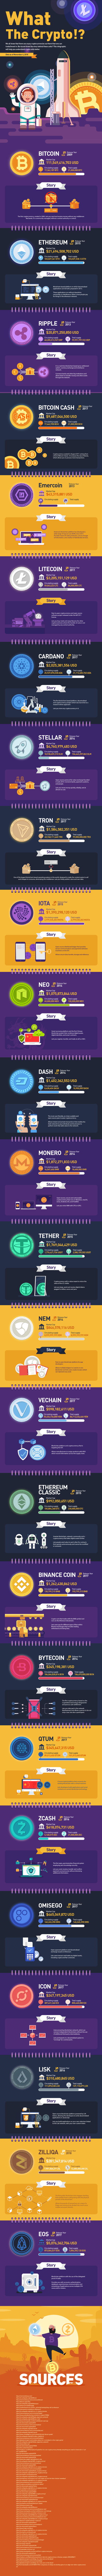 What the crypto? (Infographic)